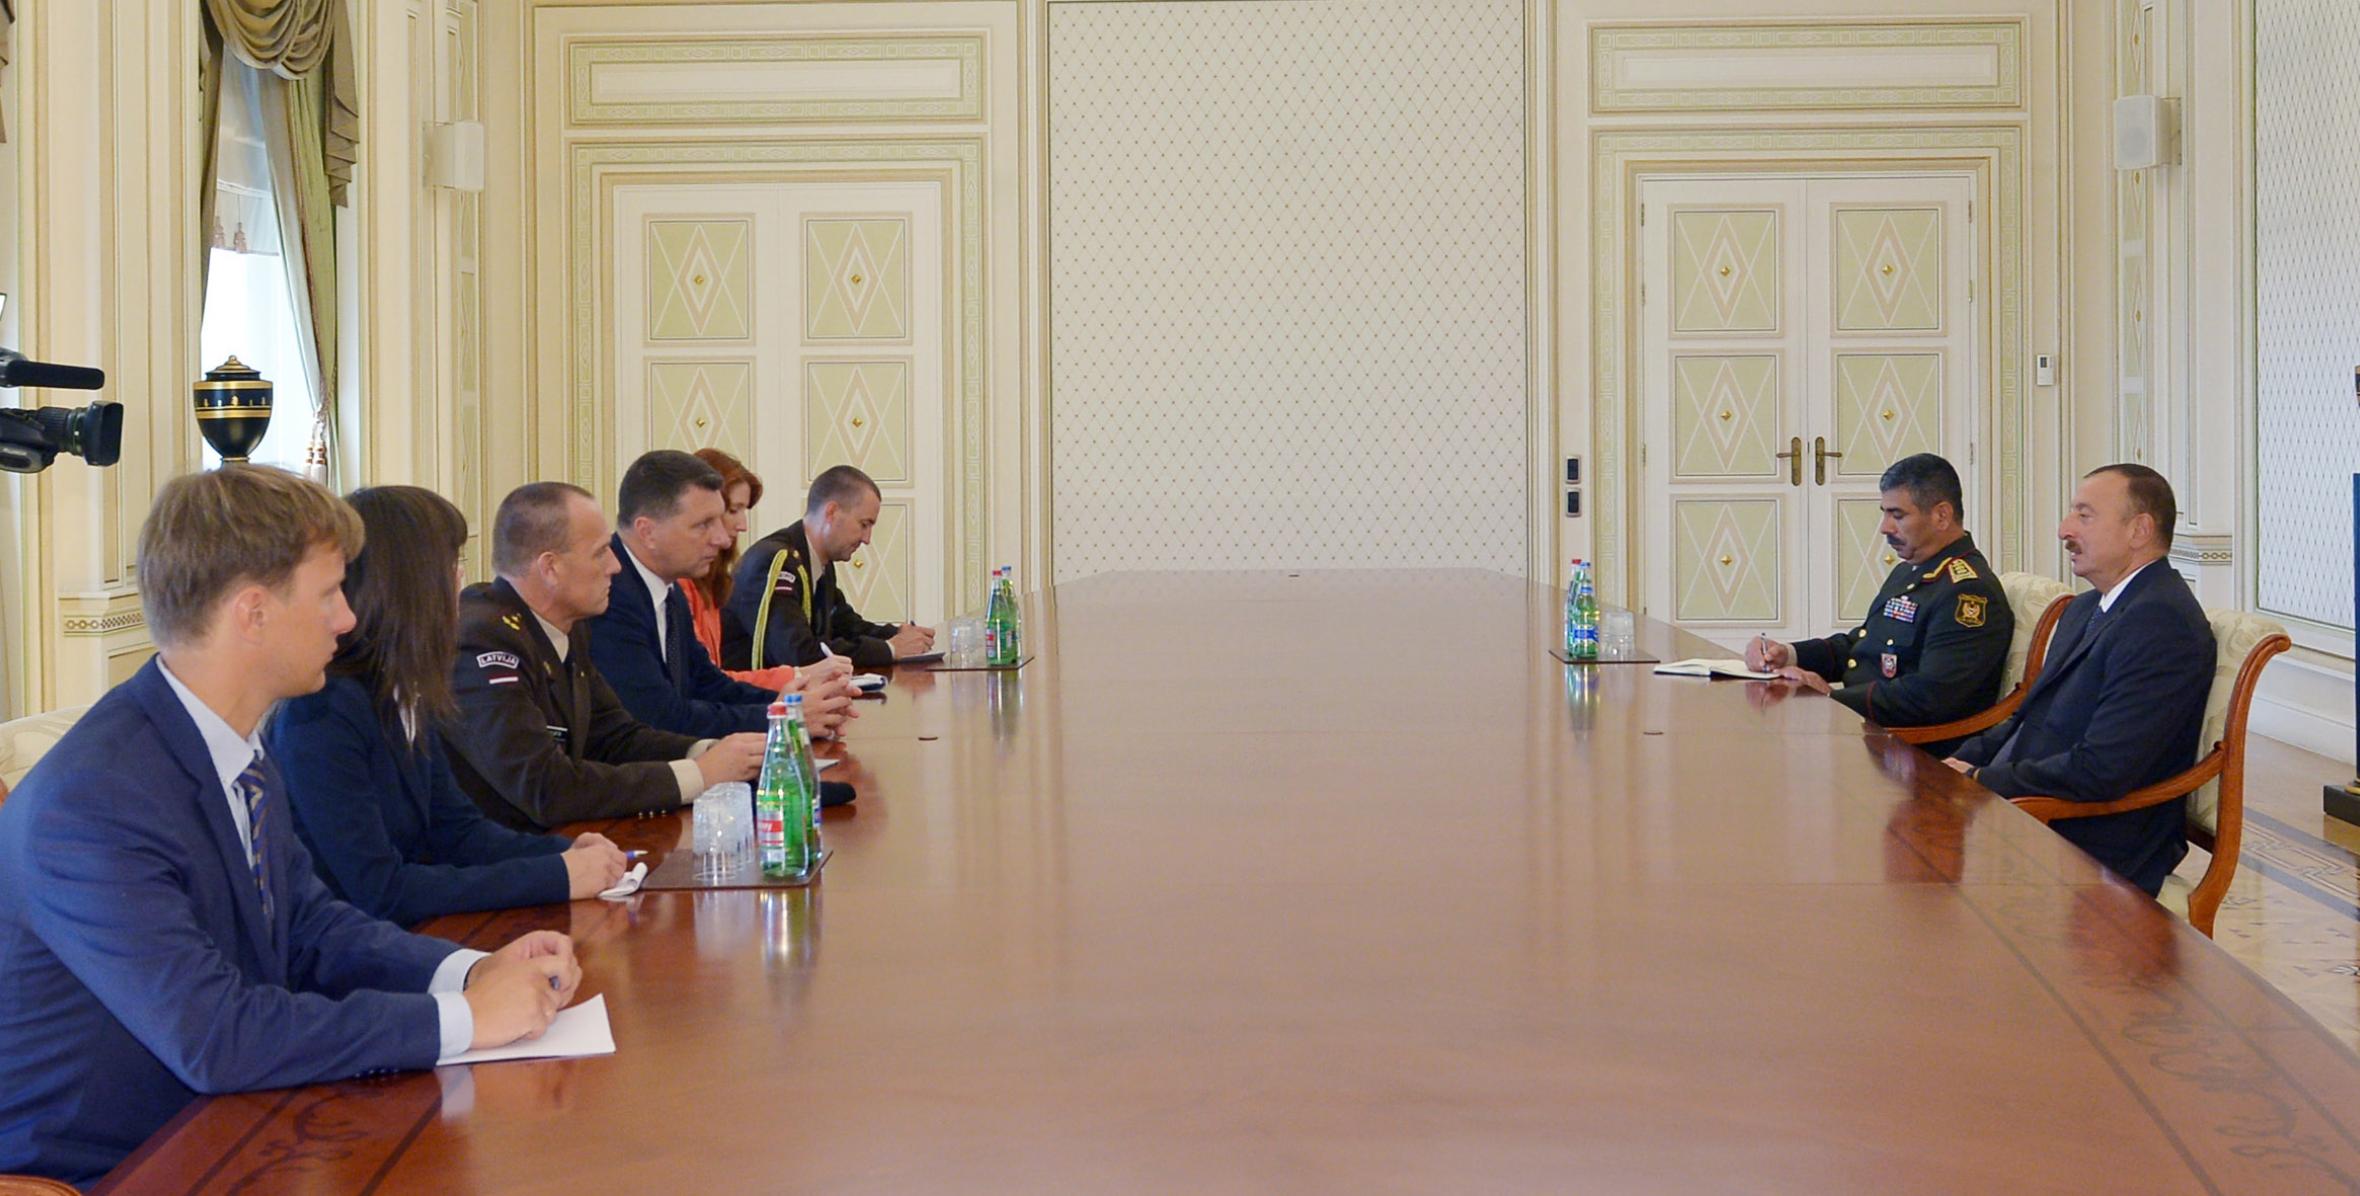 Ilham Aliyev received a delegation led by the Minister of Defense of Latvia